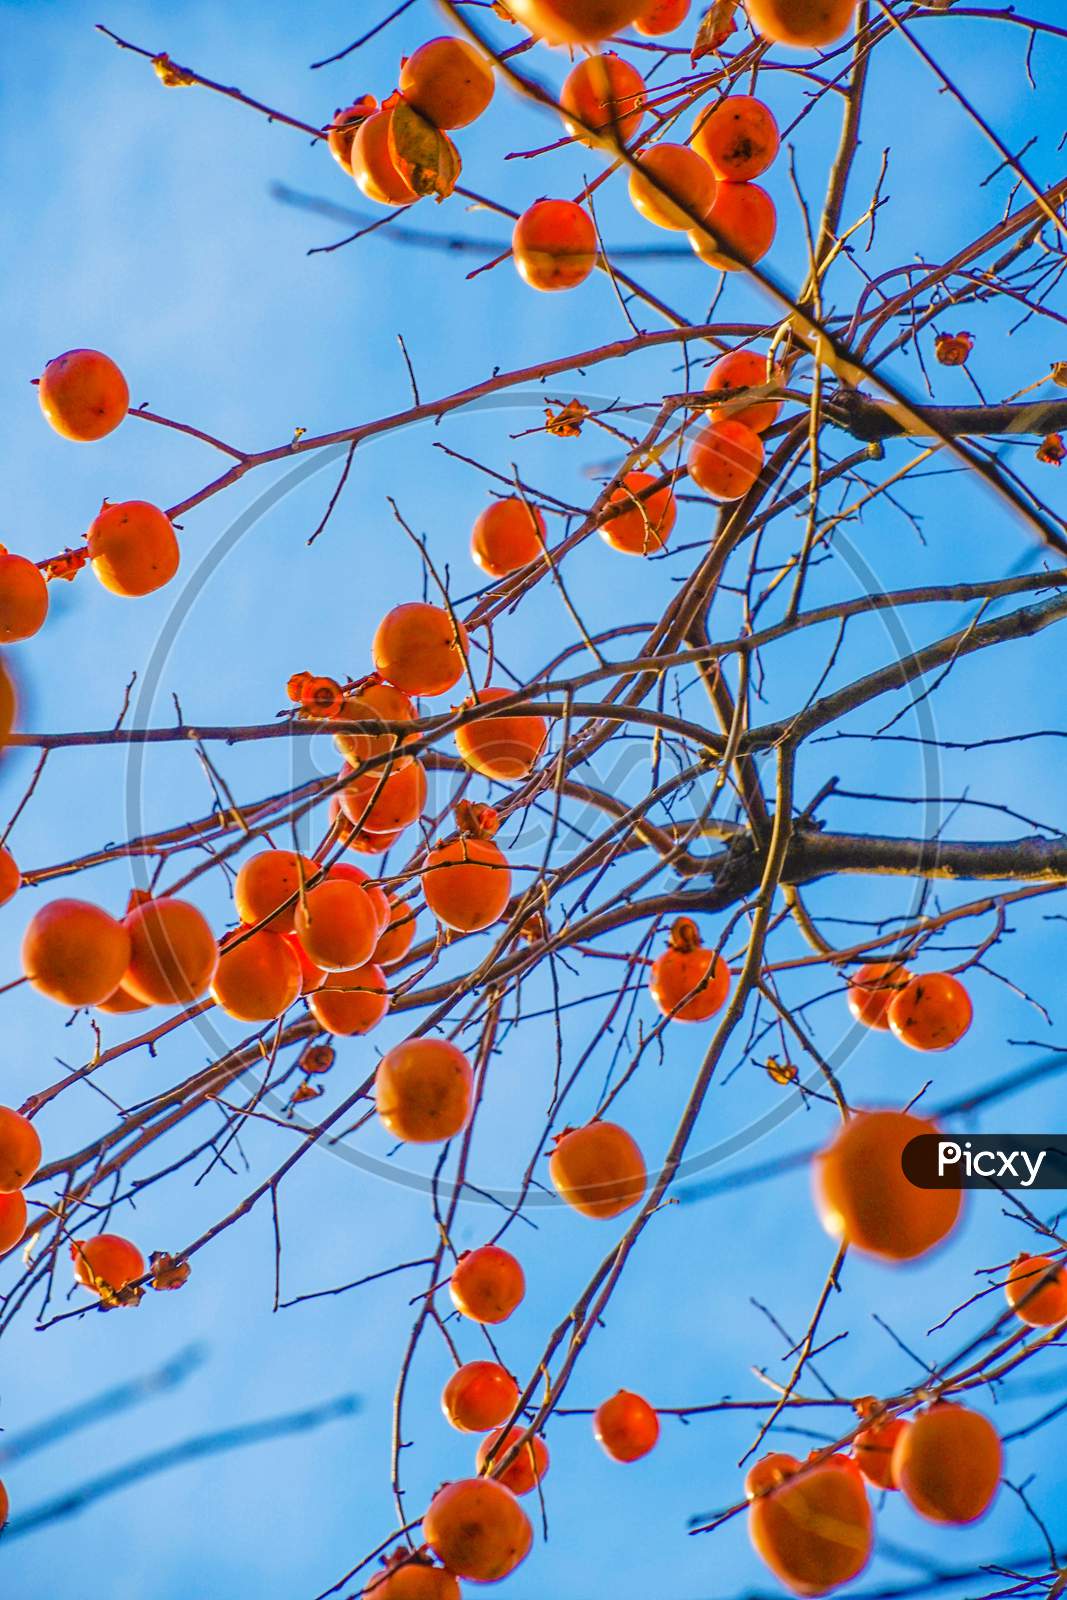 Persimmon Trees And Blue Sky Of The Image